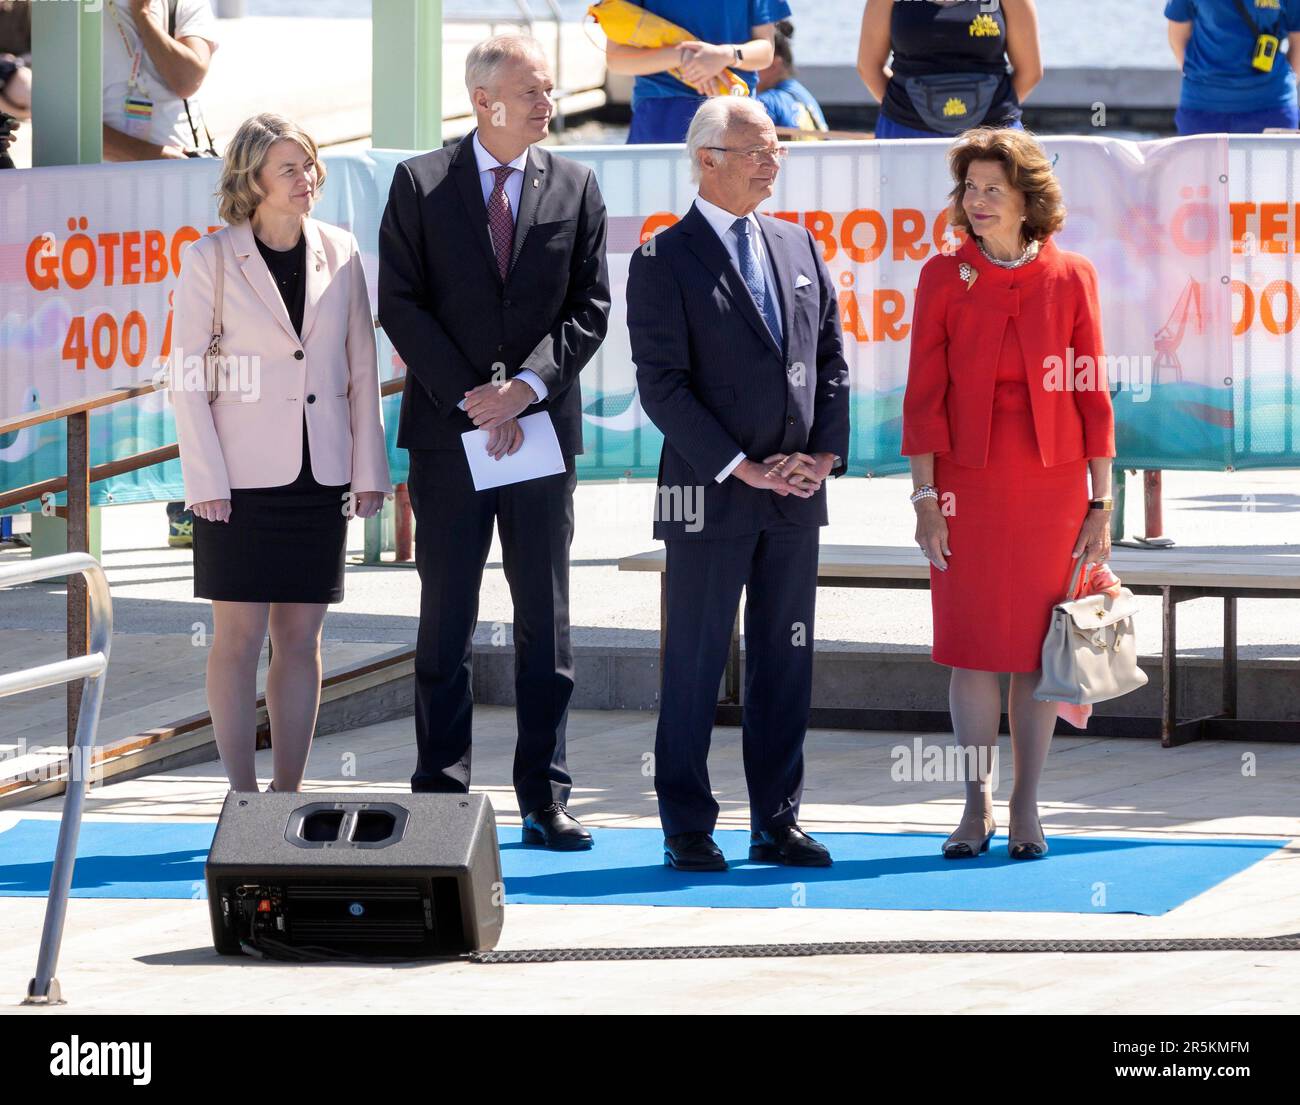 GOTHENBURG 2023-06-04 King Carl Gustaf and Queen Silvia and Governor Sten Tolgfors with partner Karin Larsson at the inauguration of the Jubileumsbade Stock Photo